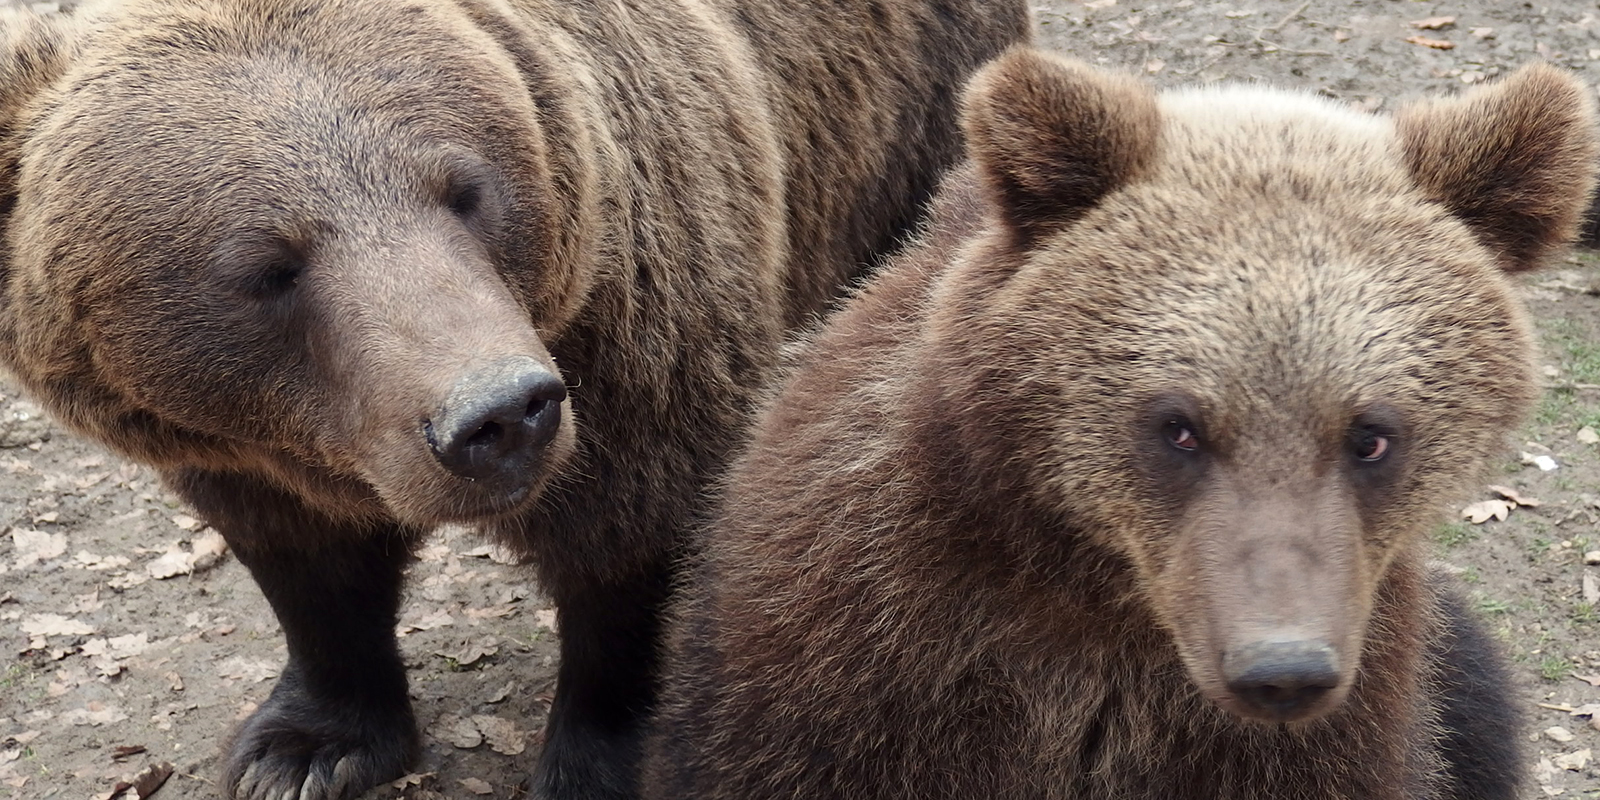 numerous brown bears in romania have been kept illegally and under miserable conditions 